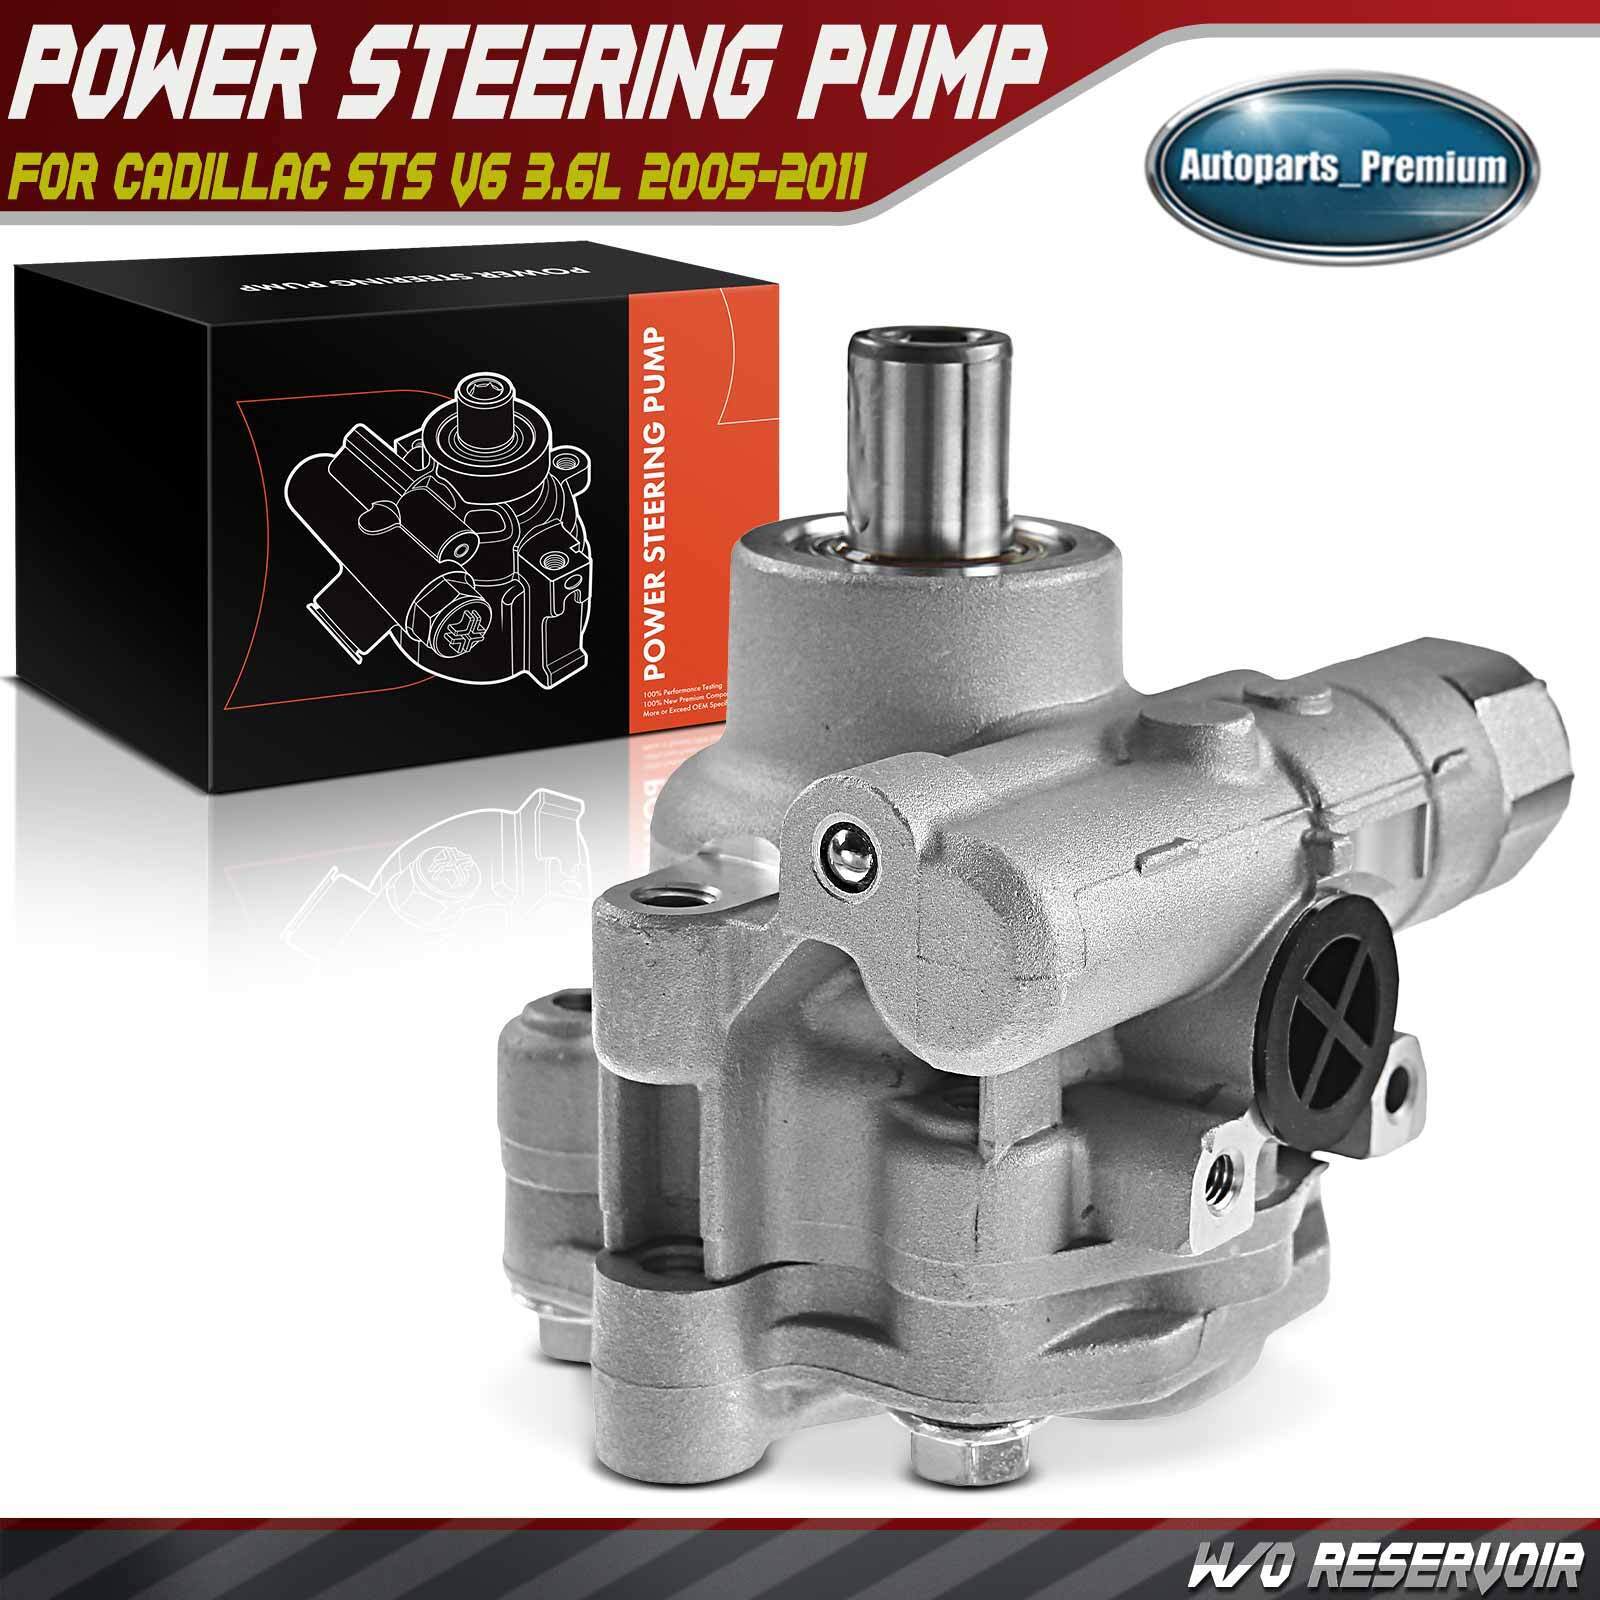 Power Steering Pump w/o Pulley for Cadillac STS V6 3.6L 2005-11 25769221 21-5466